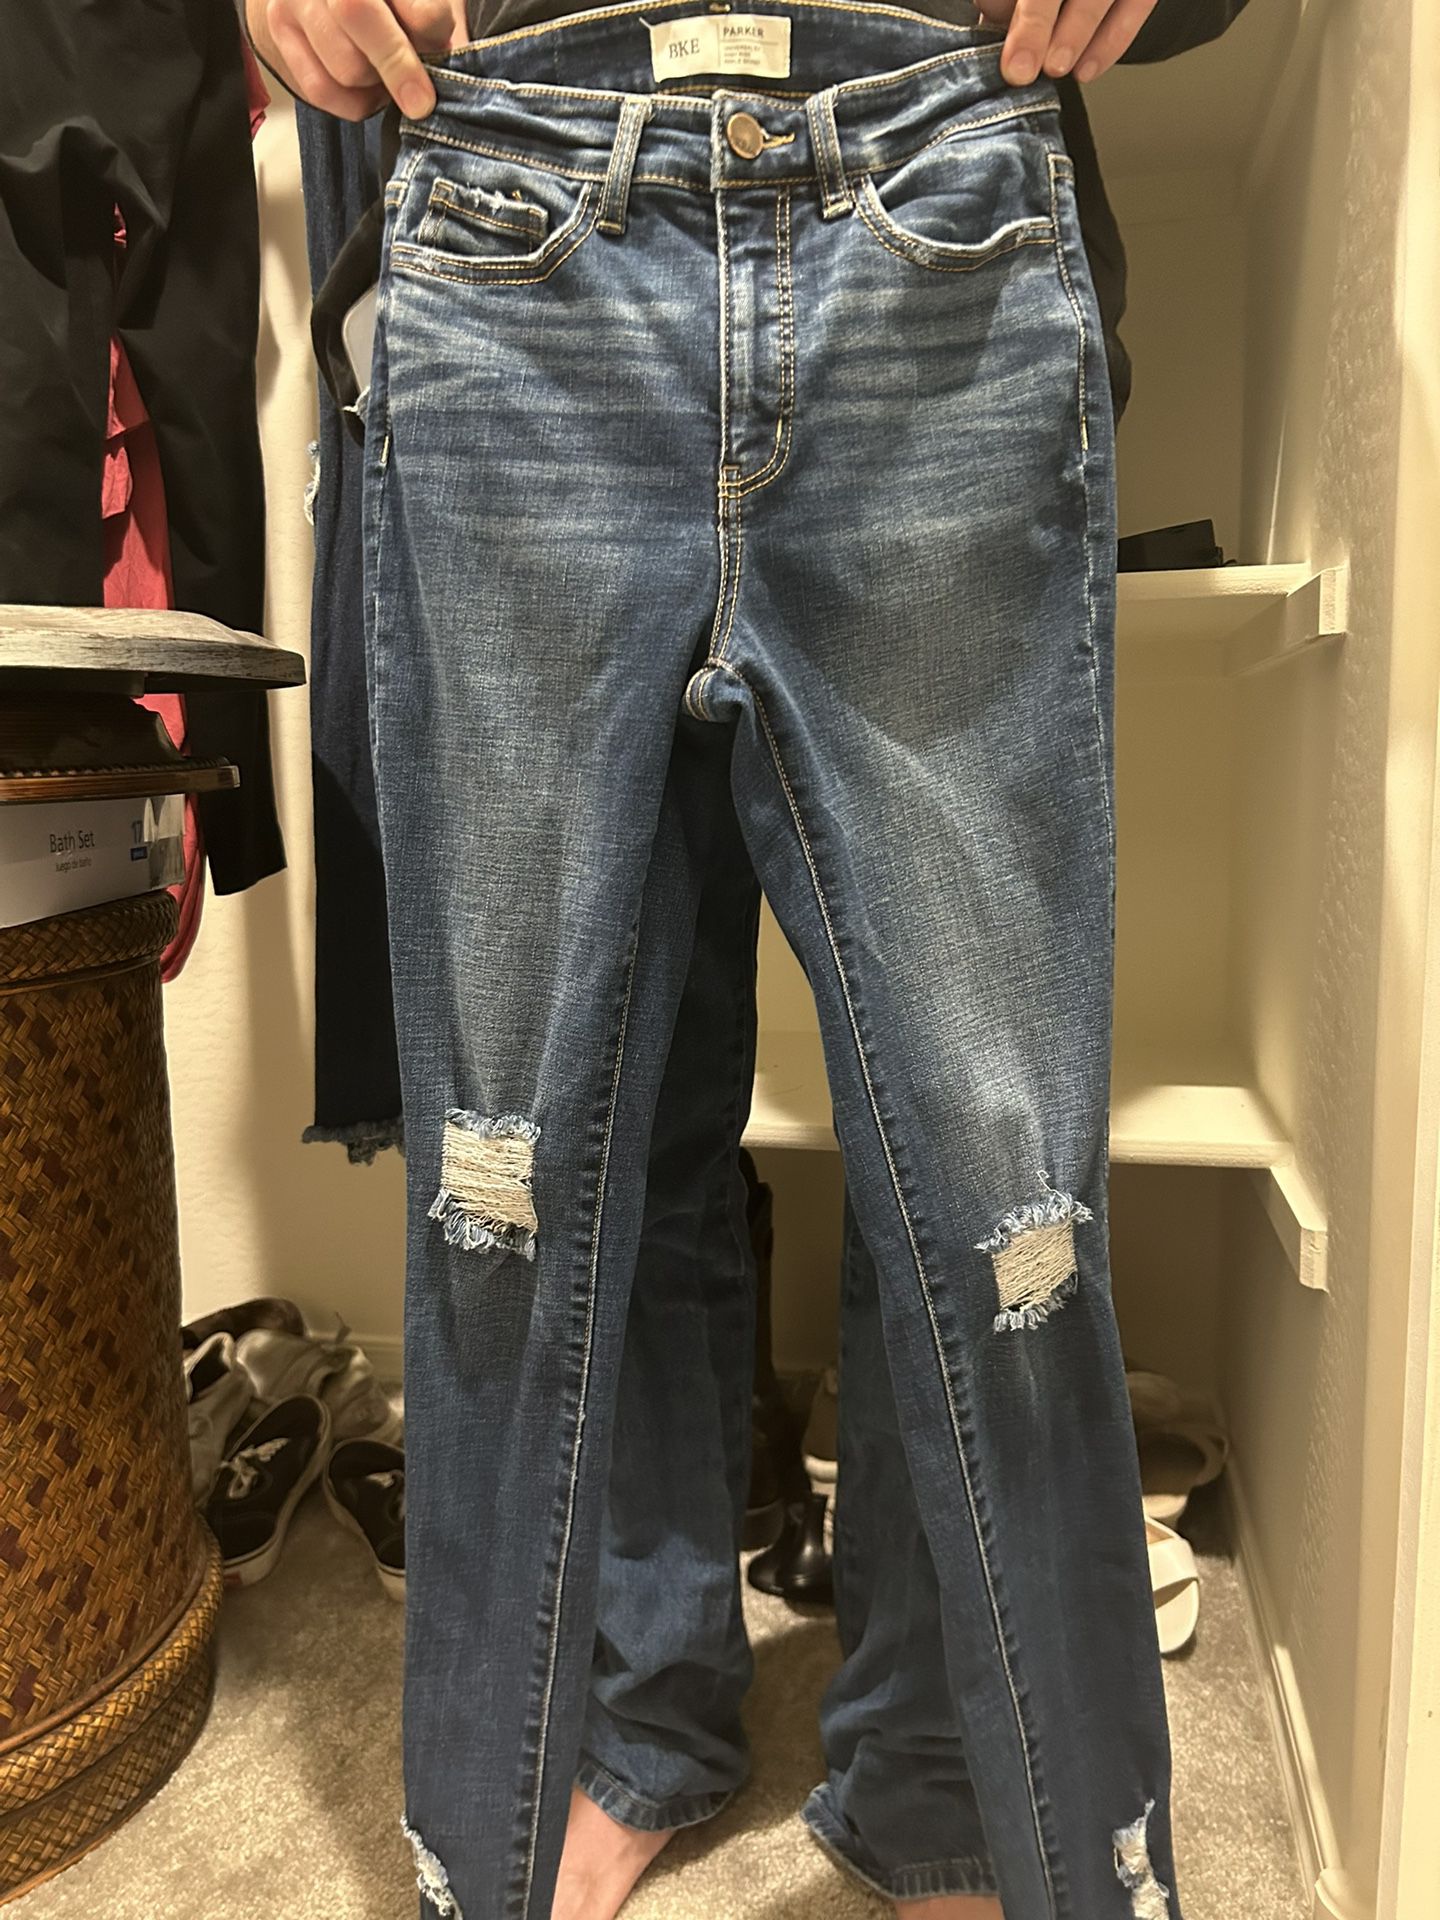 Buckle Jeans 